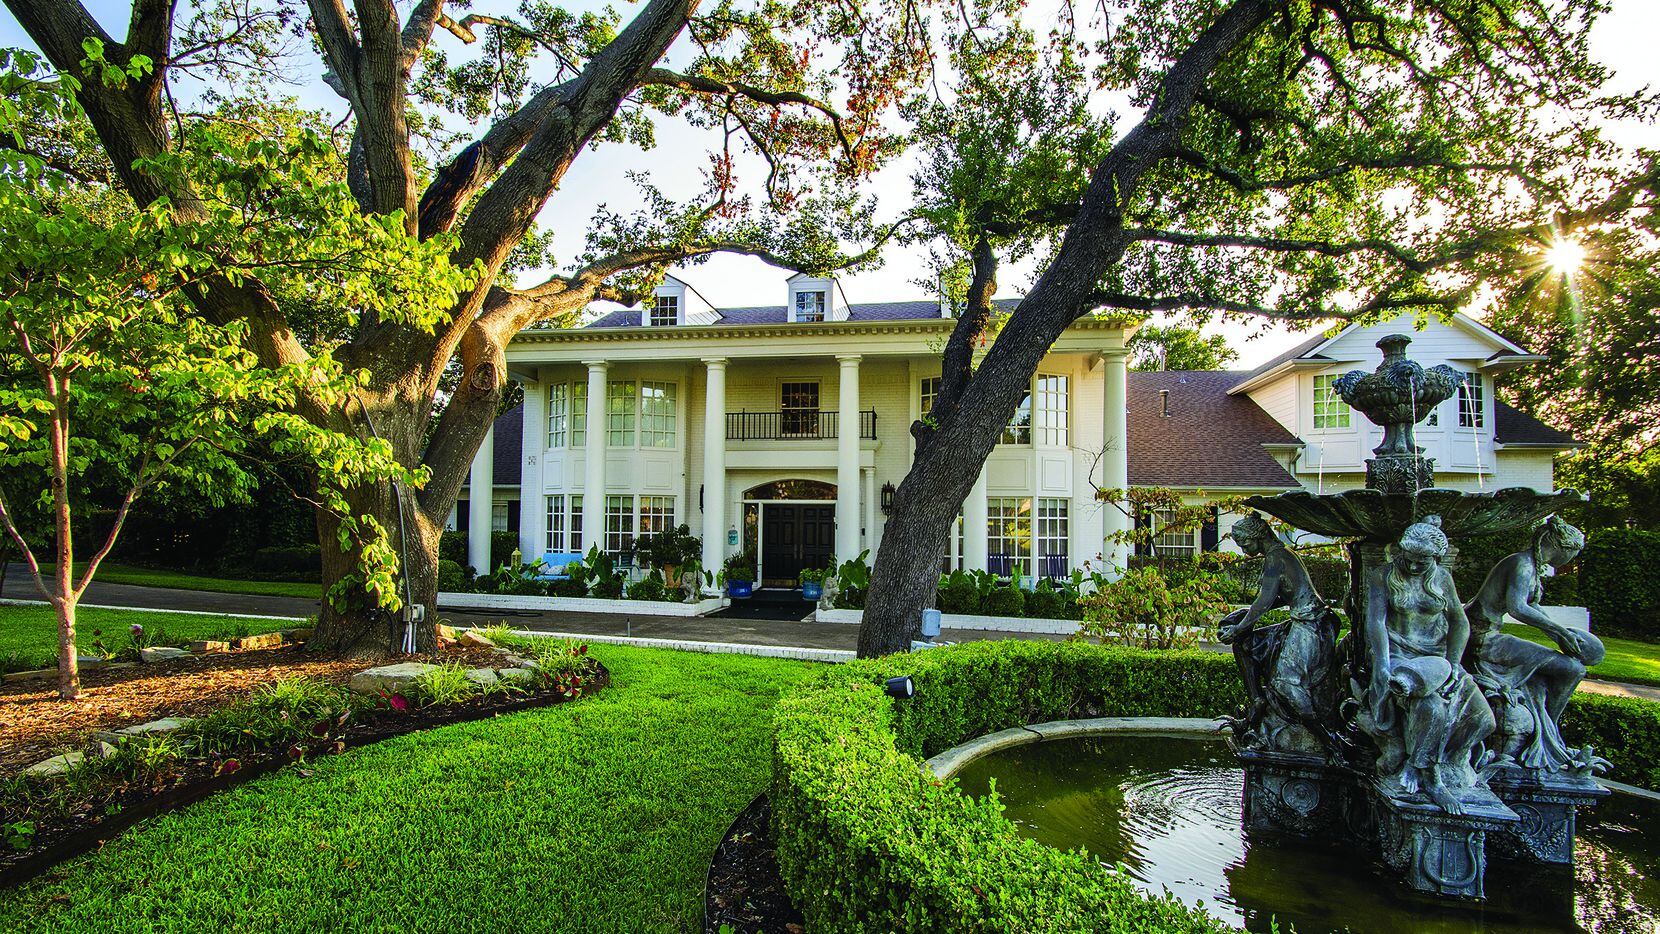 The Greek Revival home at 6706 Gateridge Drive in Northwood Hills is offered for $1,450,000...